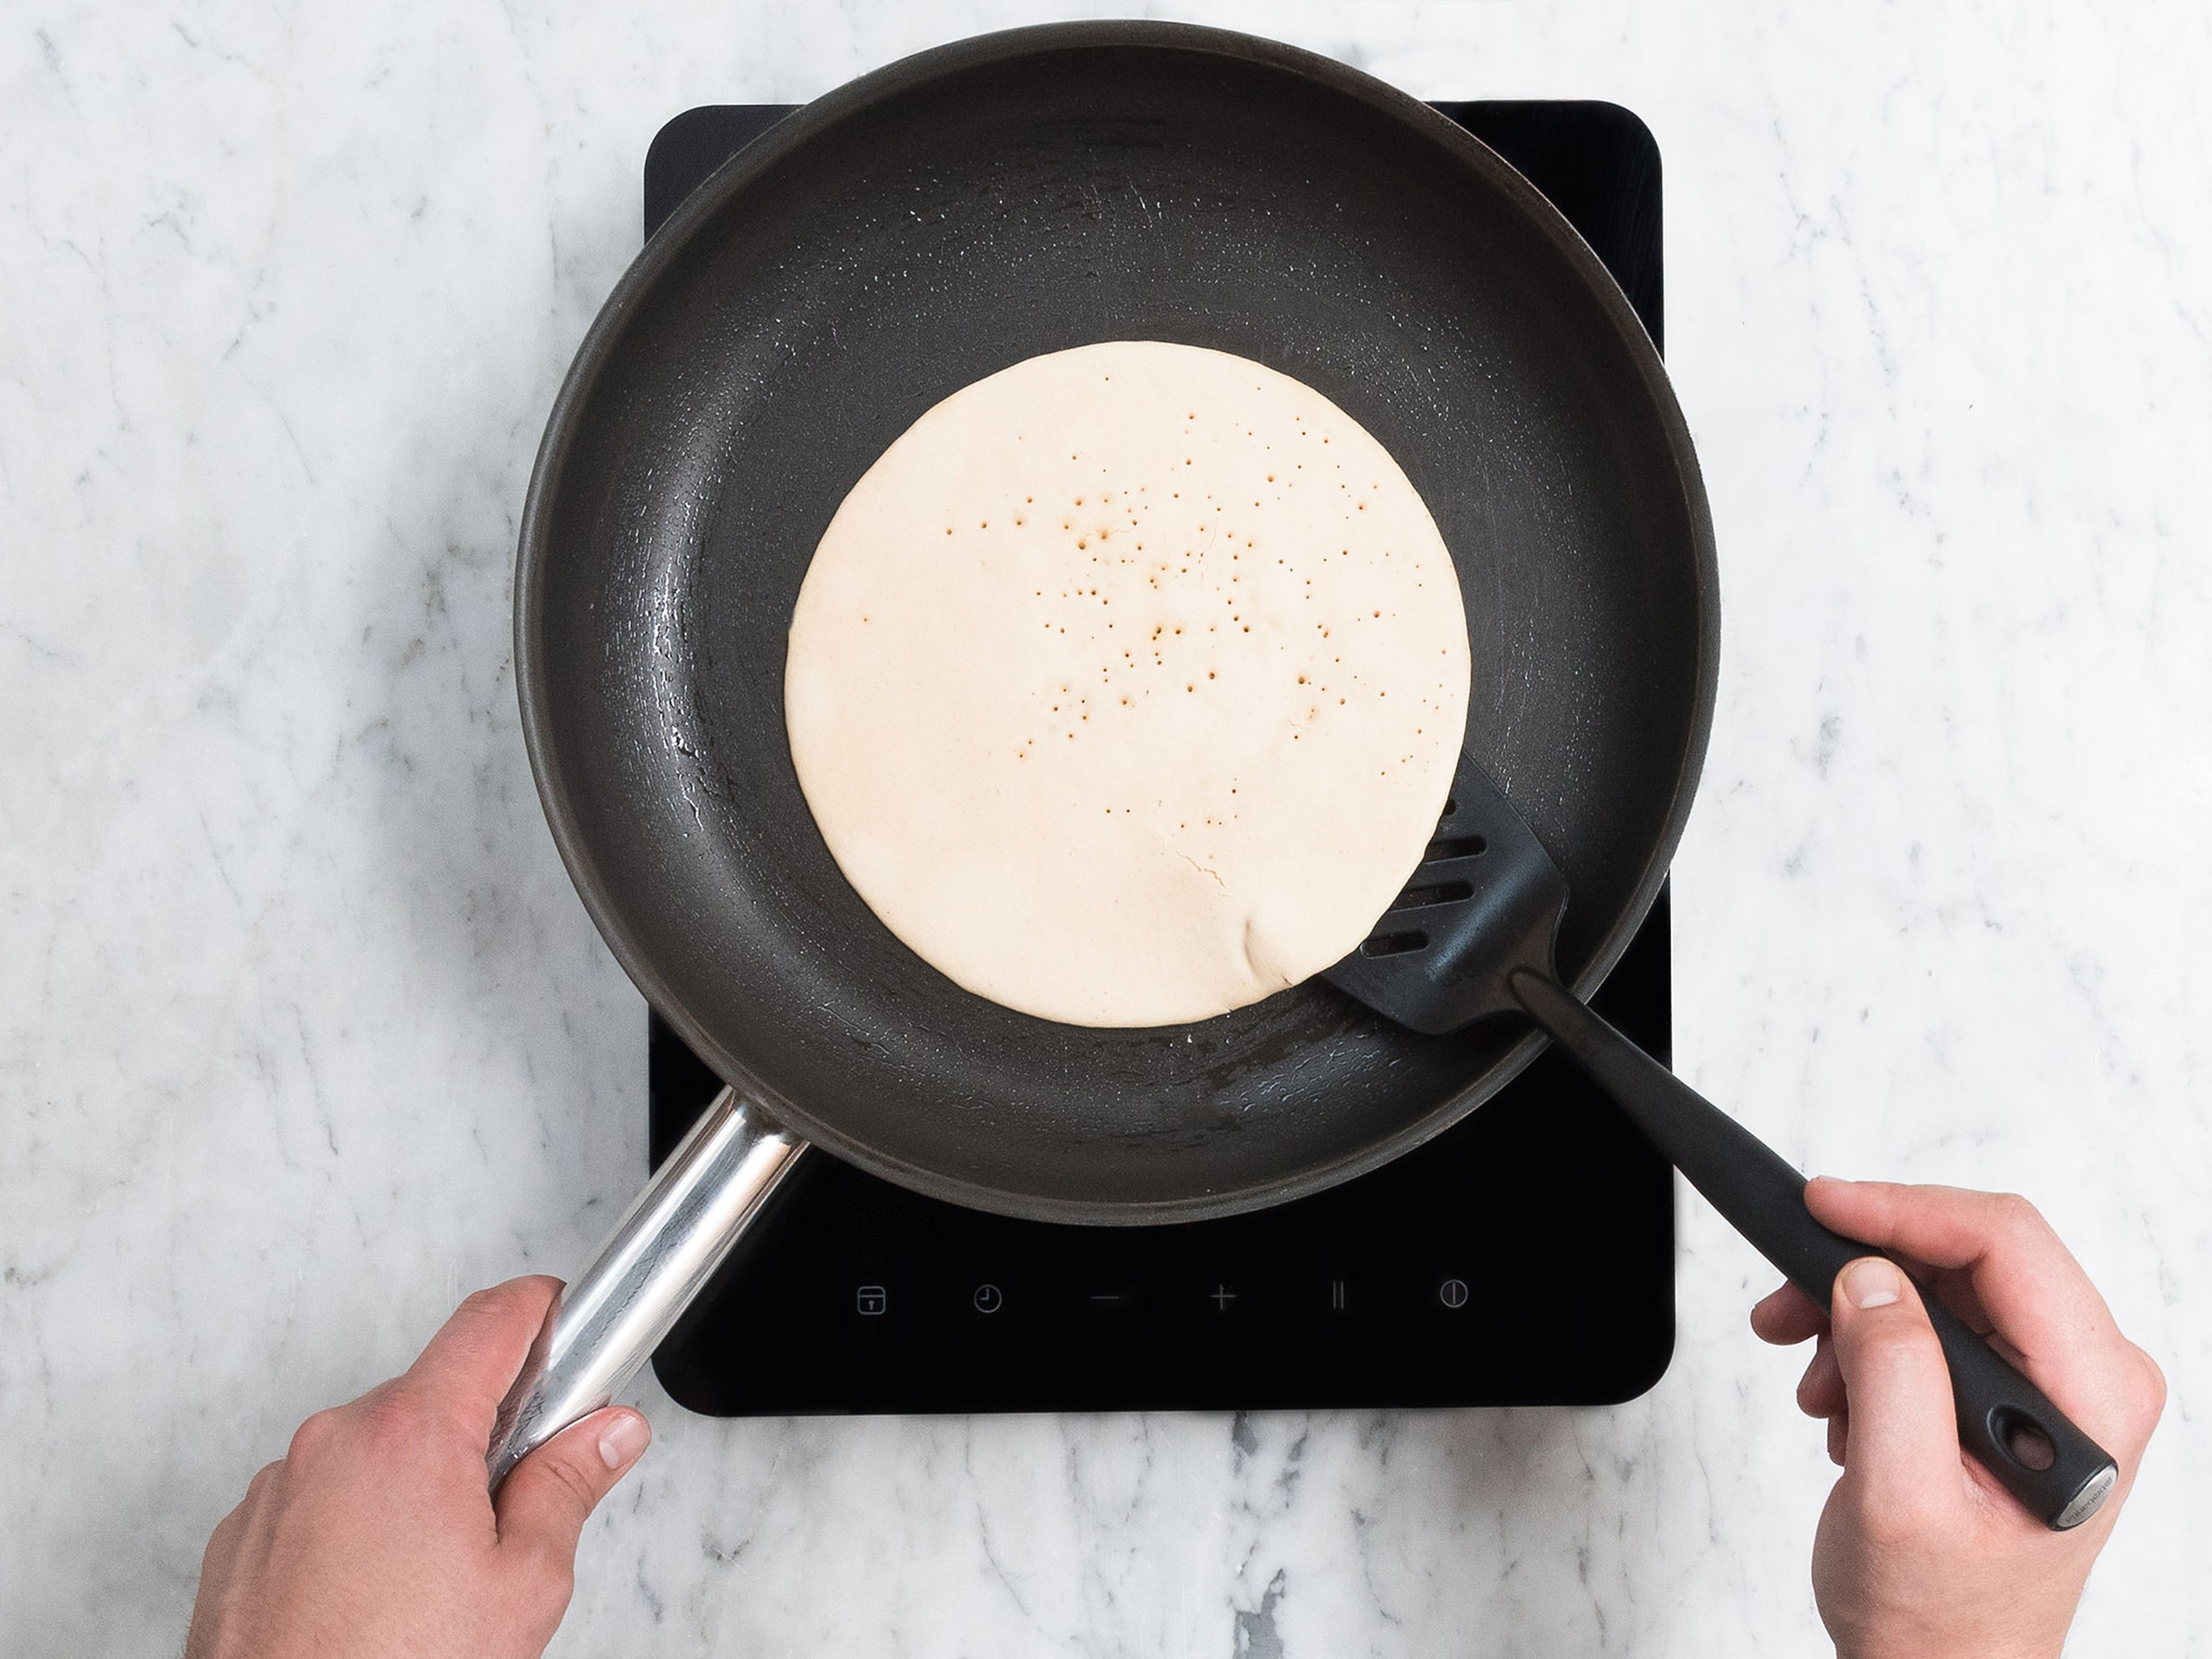 Remove dosa batter from fridge and stir. Heat clarified butter in a frying pan set over medium-low heat. Add one ladle of batter to the frying pan and tilt the frying pan so that you have an even layer of batter. Fry until golden brown on both sides, and repeat the process until you have used up all the batter.